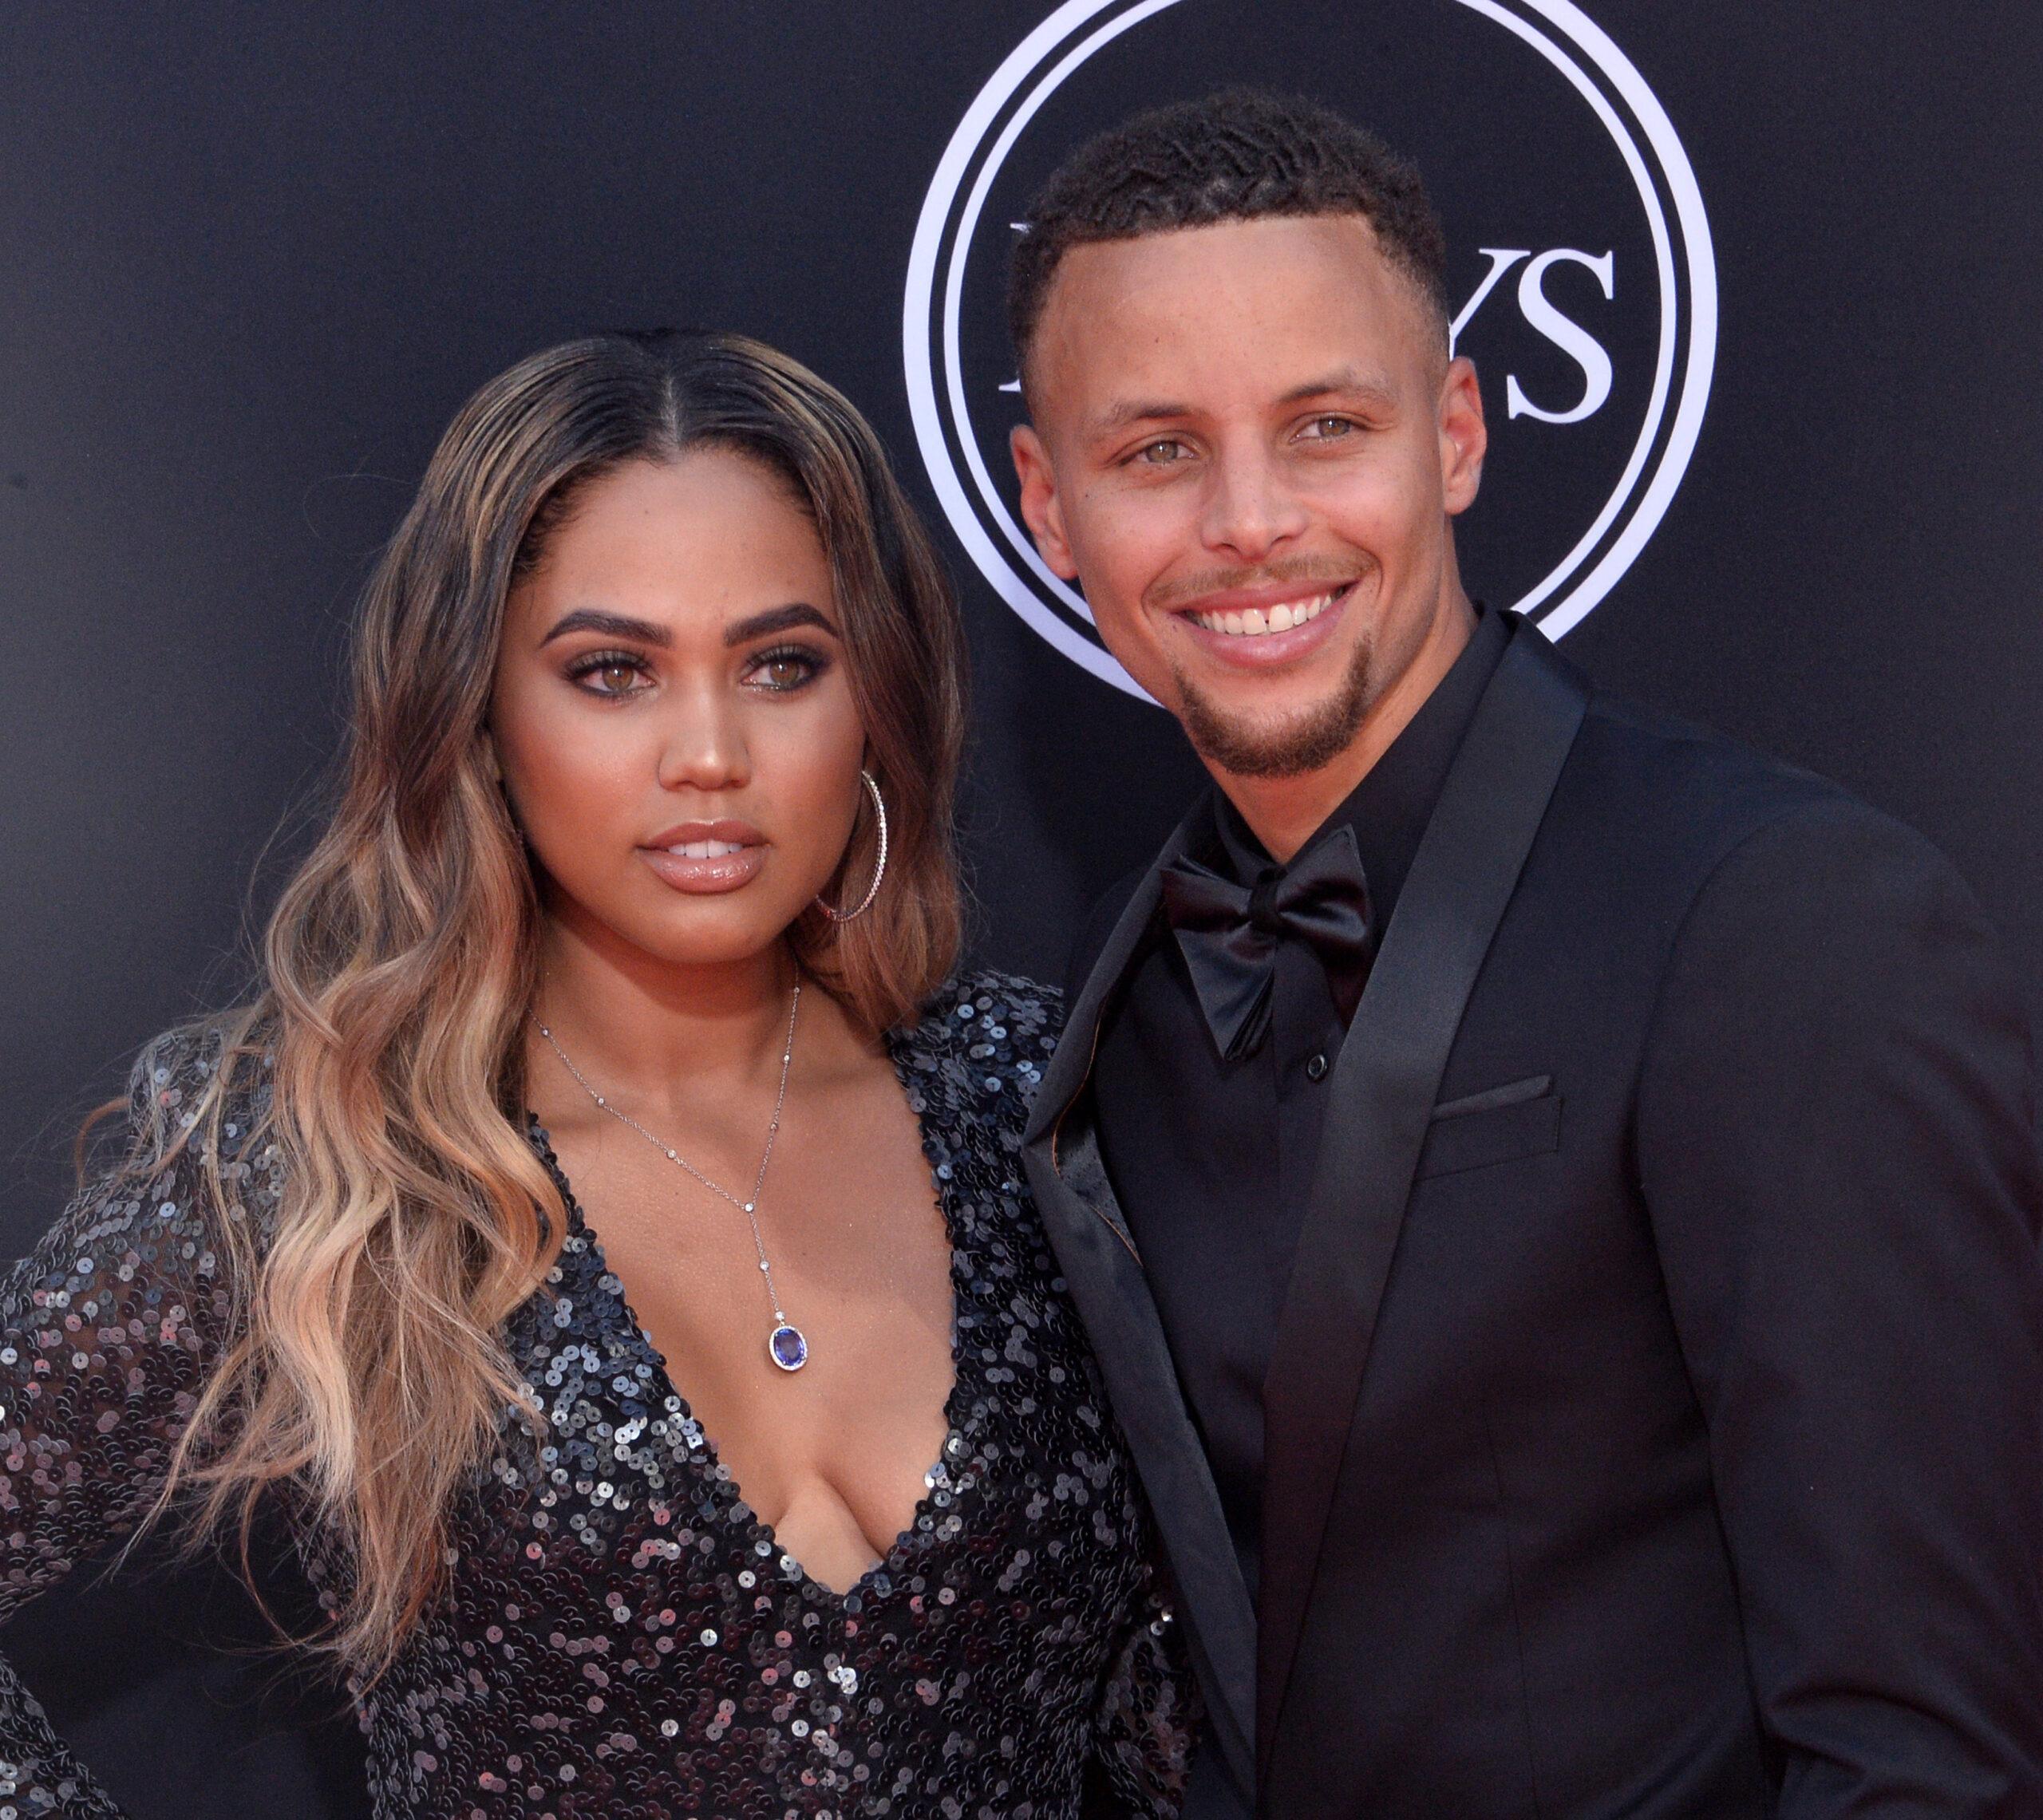 Steph Curry and Ayesha Curry at the 25th ESPYS in Los Angeles